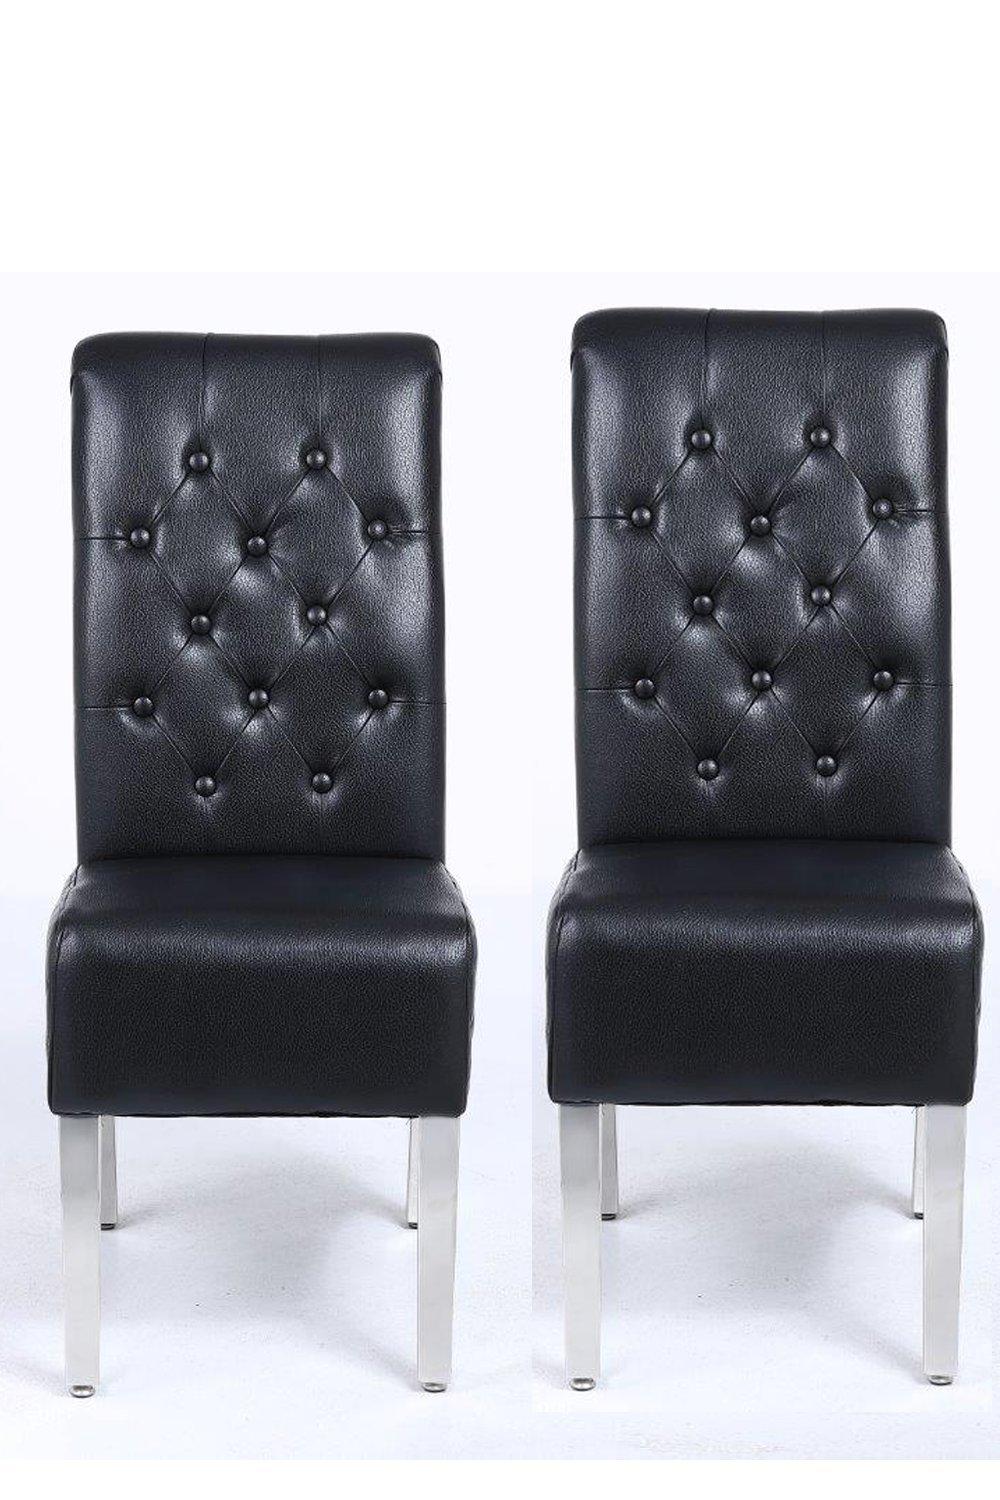 A Pair (x2) Leather Aire High Back Dining Chairs with Chrome Legs